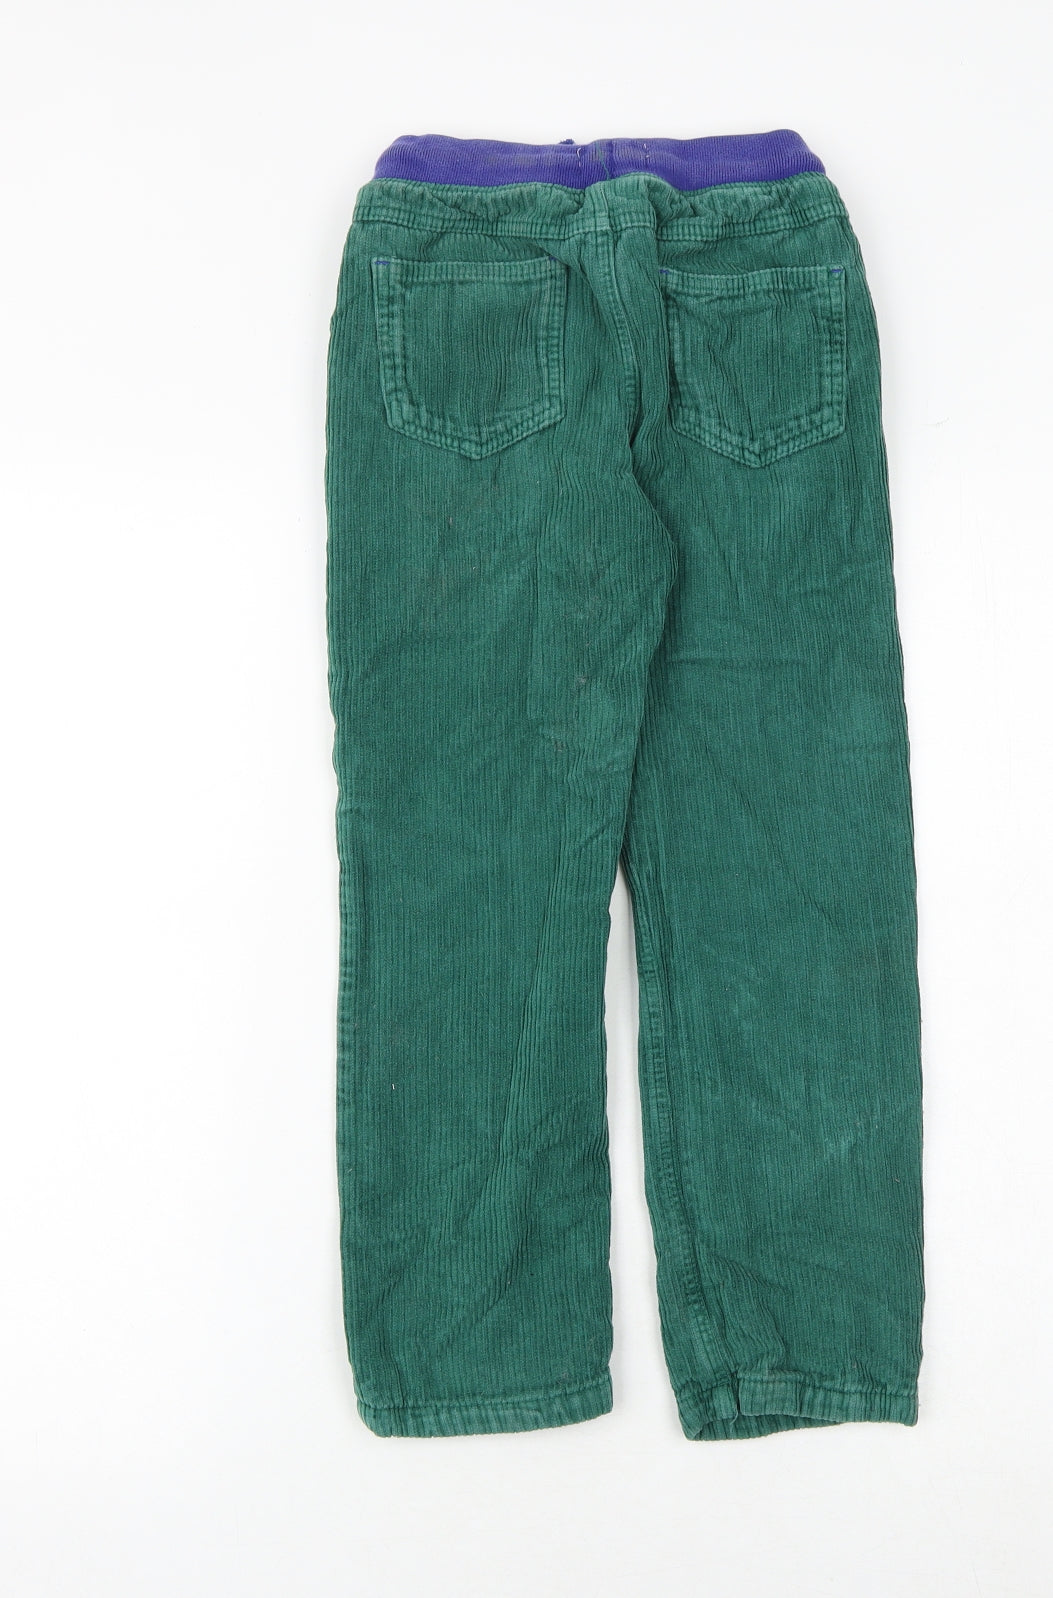 Boden Boys Green 100% Cotton Jogger Trousers Size 8 Years Regular Drawstring